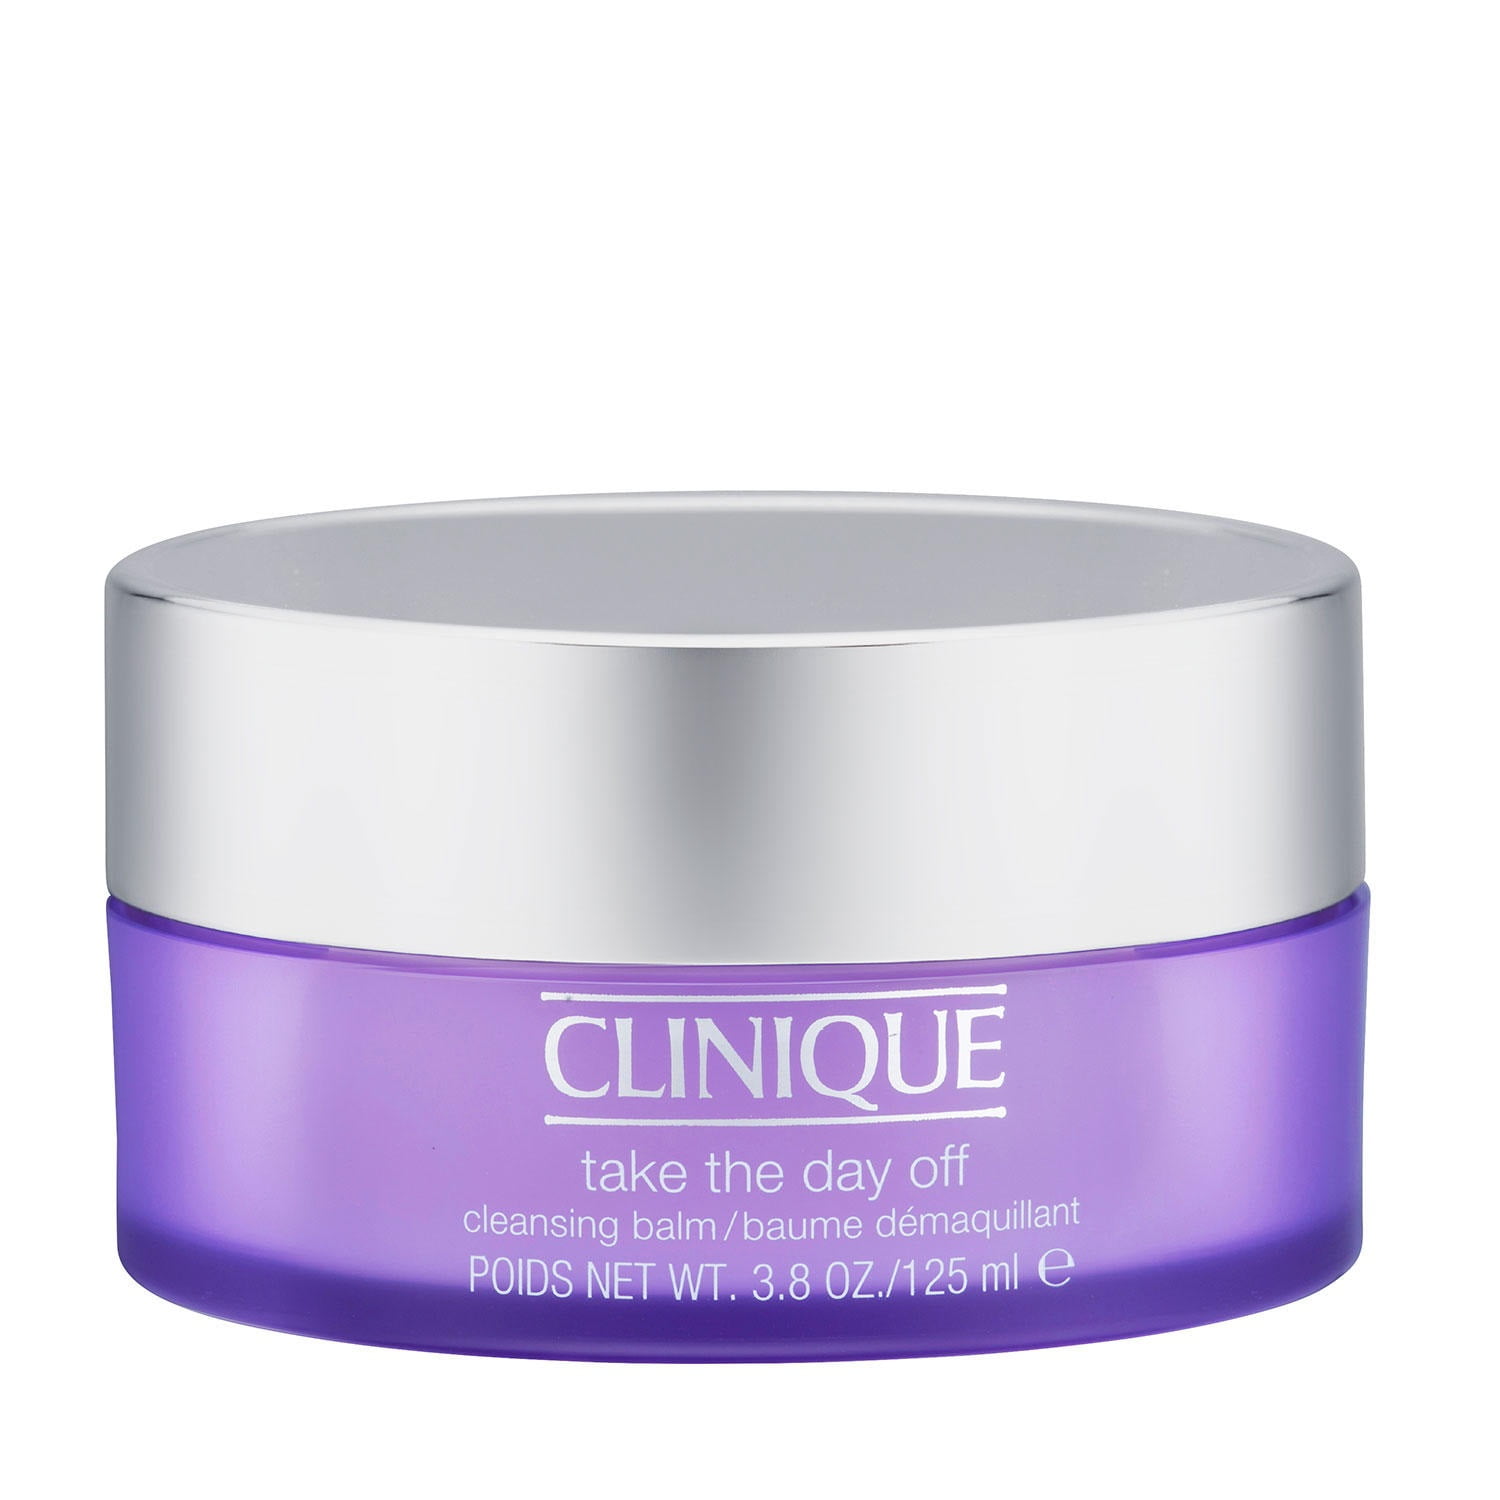 Clinique Take The Day Off Cleansing Balm, 3.8 oz